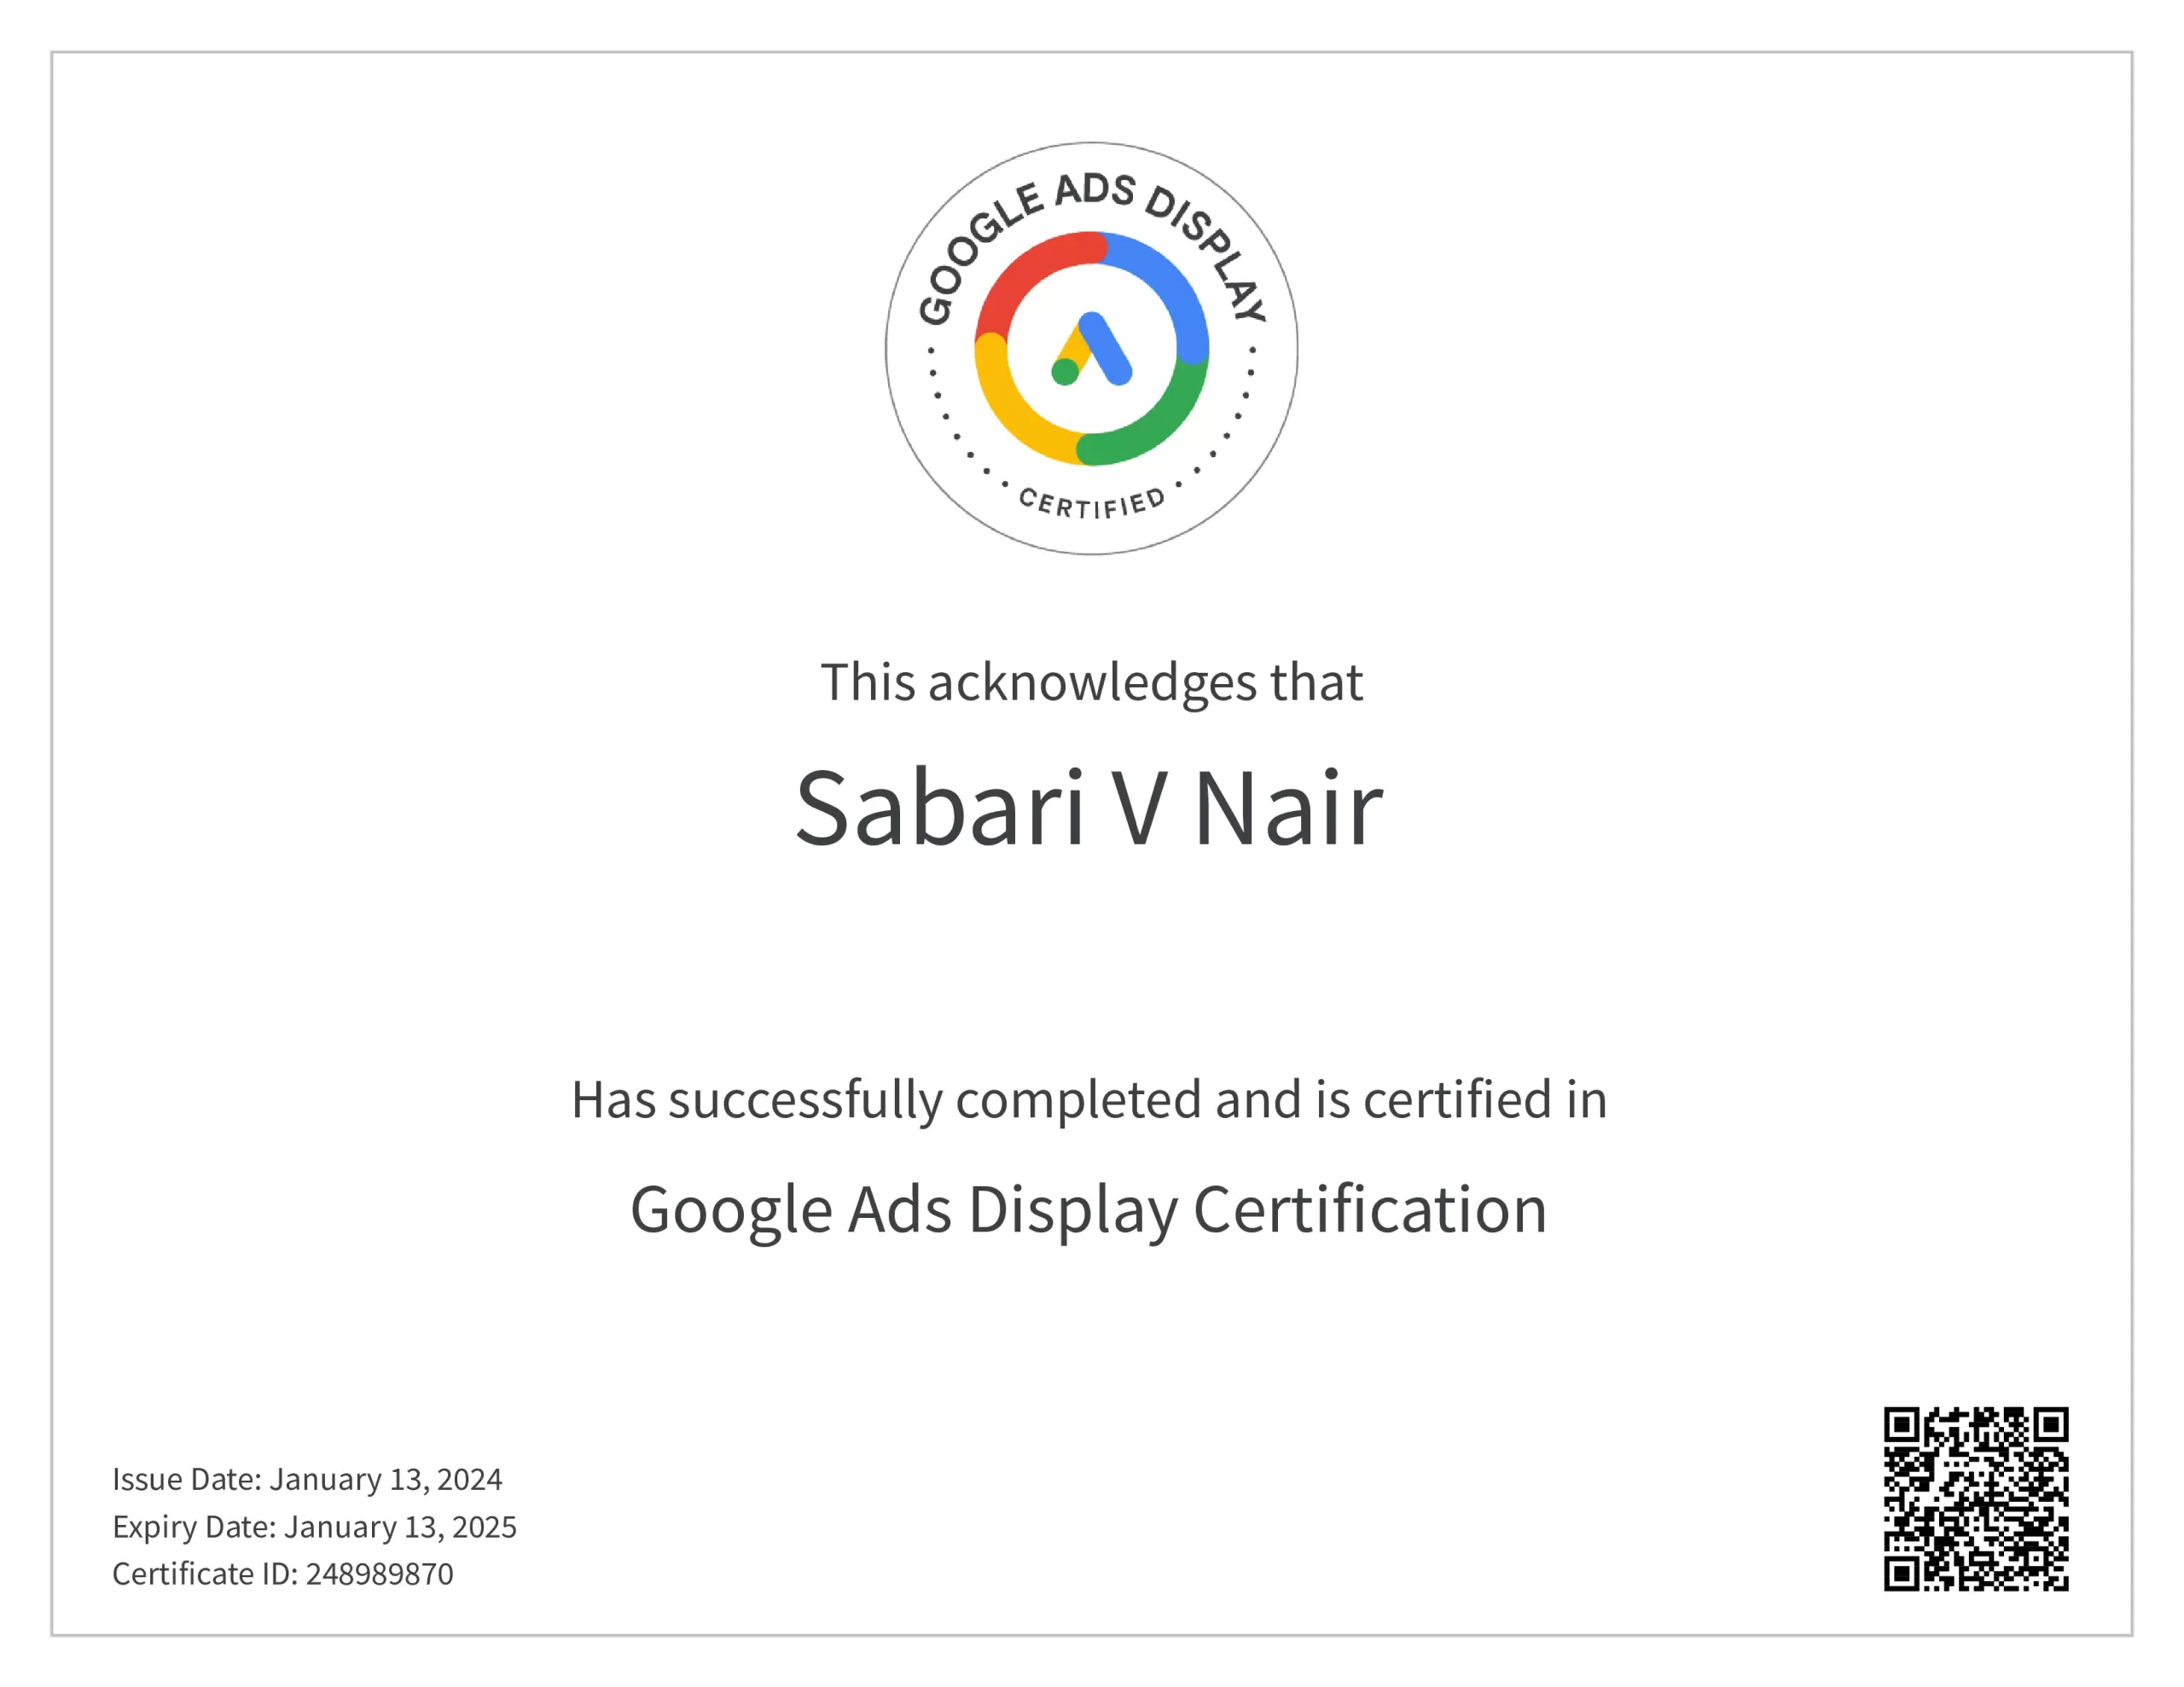 Display Ads Certification